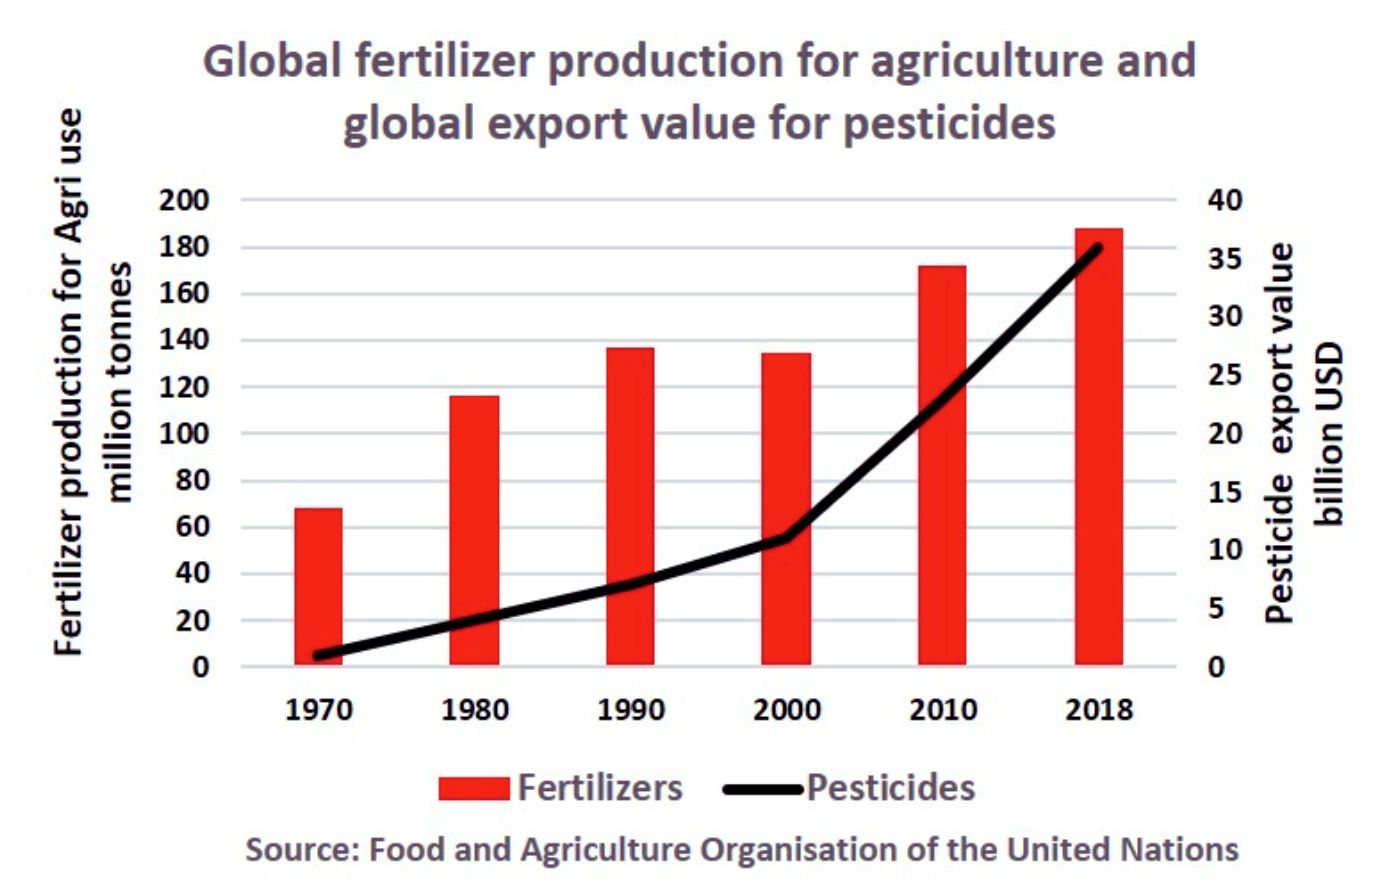 Production and export of fertilisers and pesticides